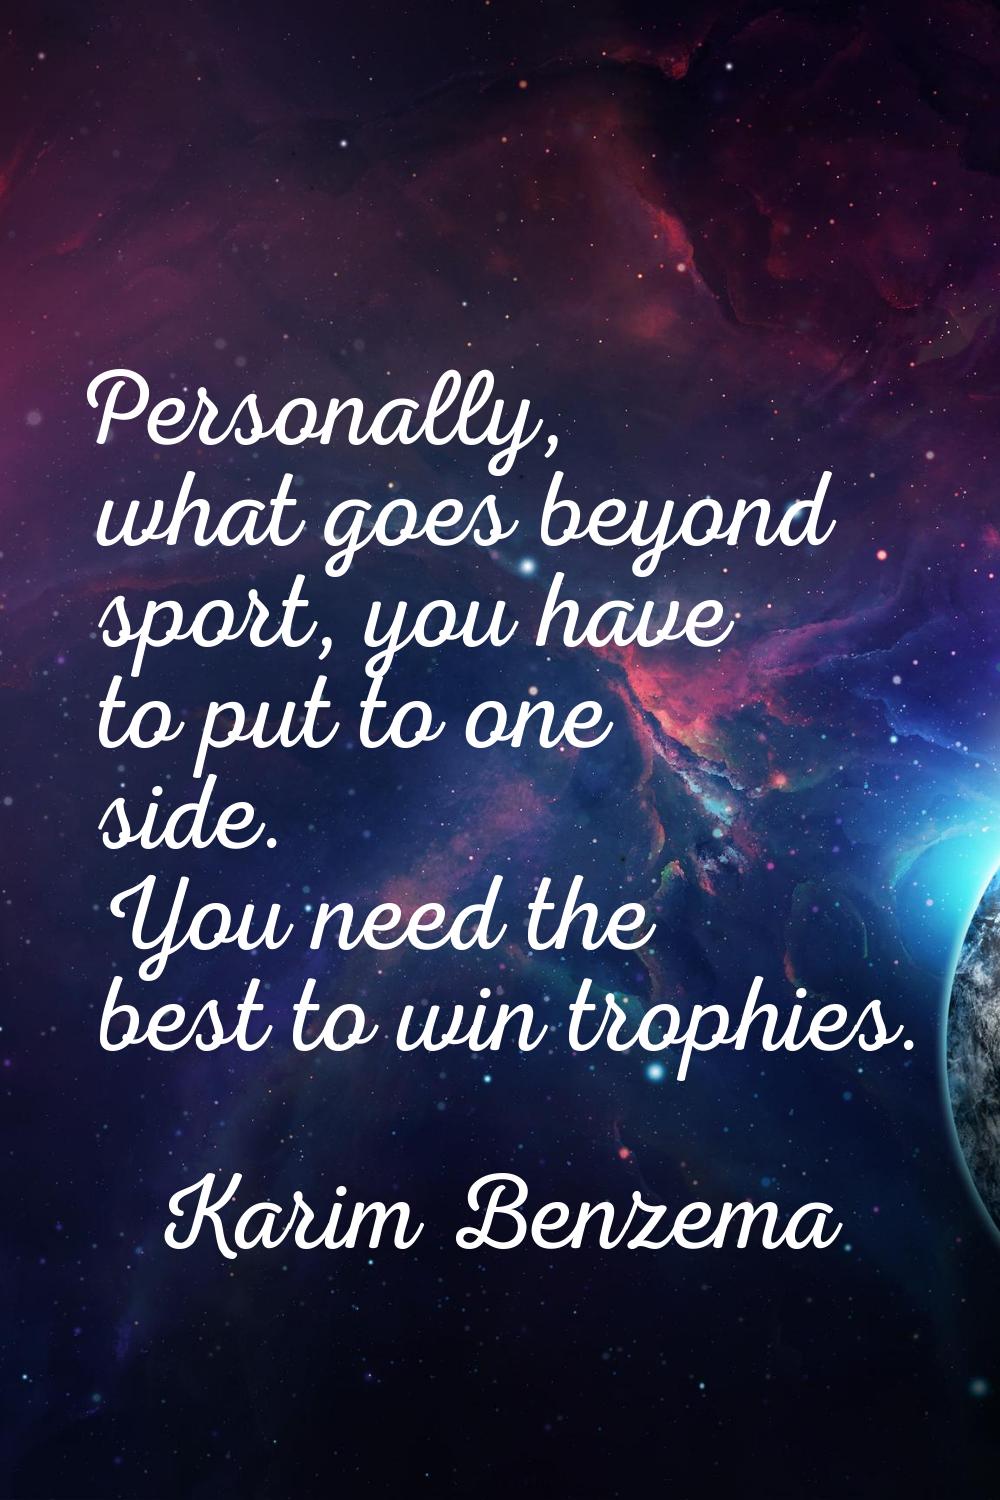 Personally, what goes beyond sport, you have to put to one side. You need the best to win trophies.